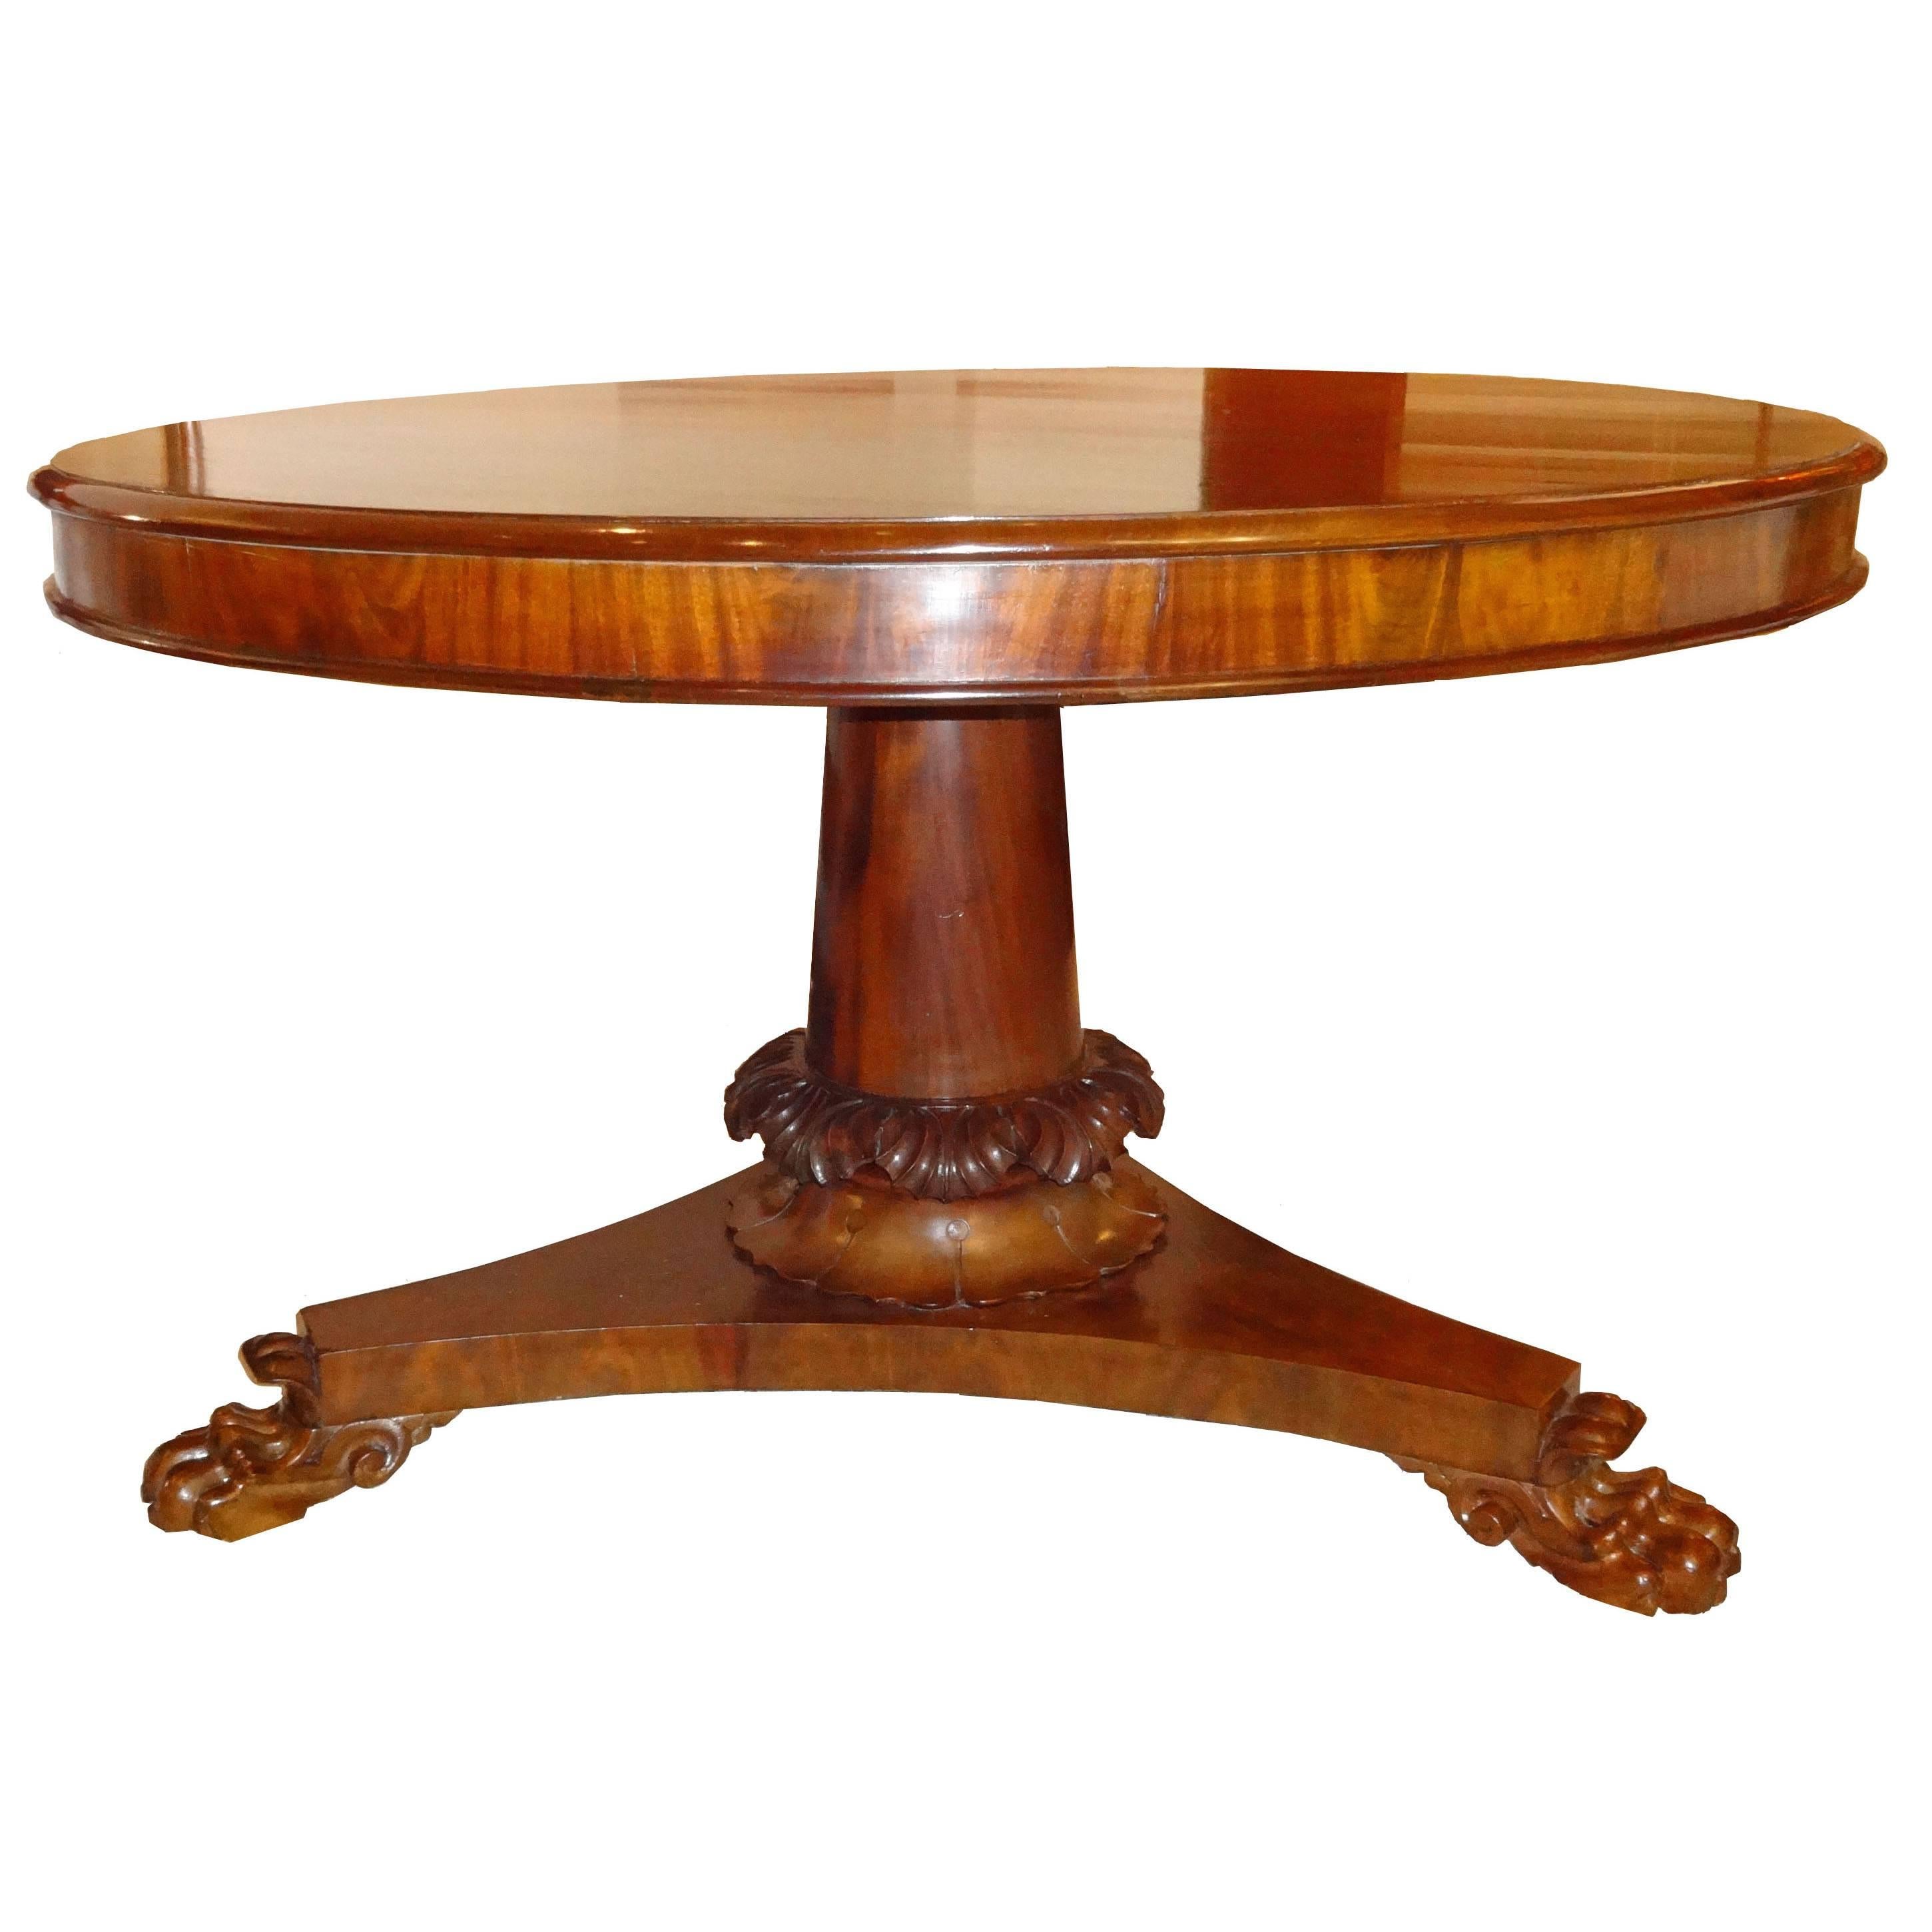 Mid-19th Century Breakfast or Center Pedestal Table in Mahogany by Antique For Sale